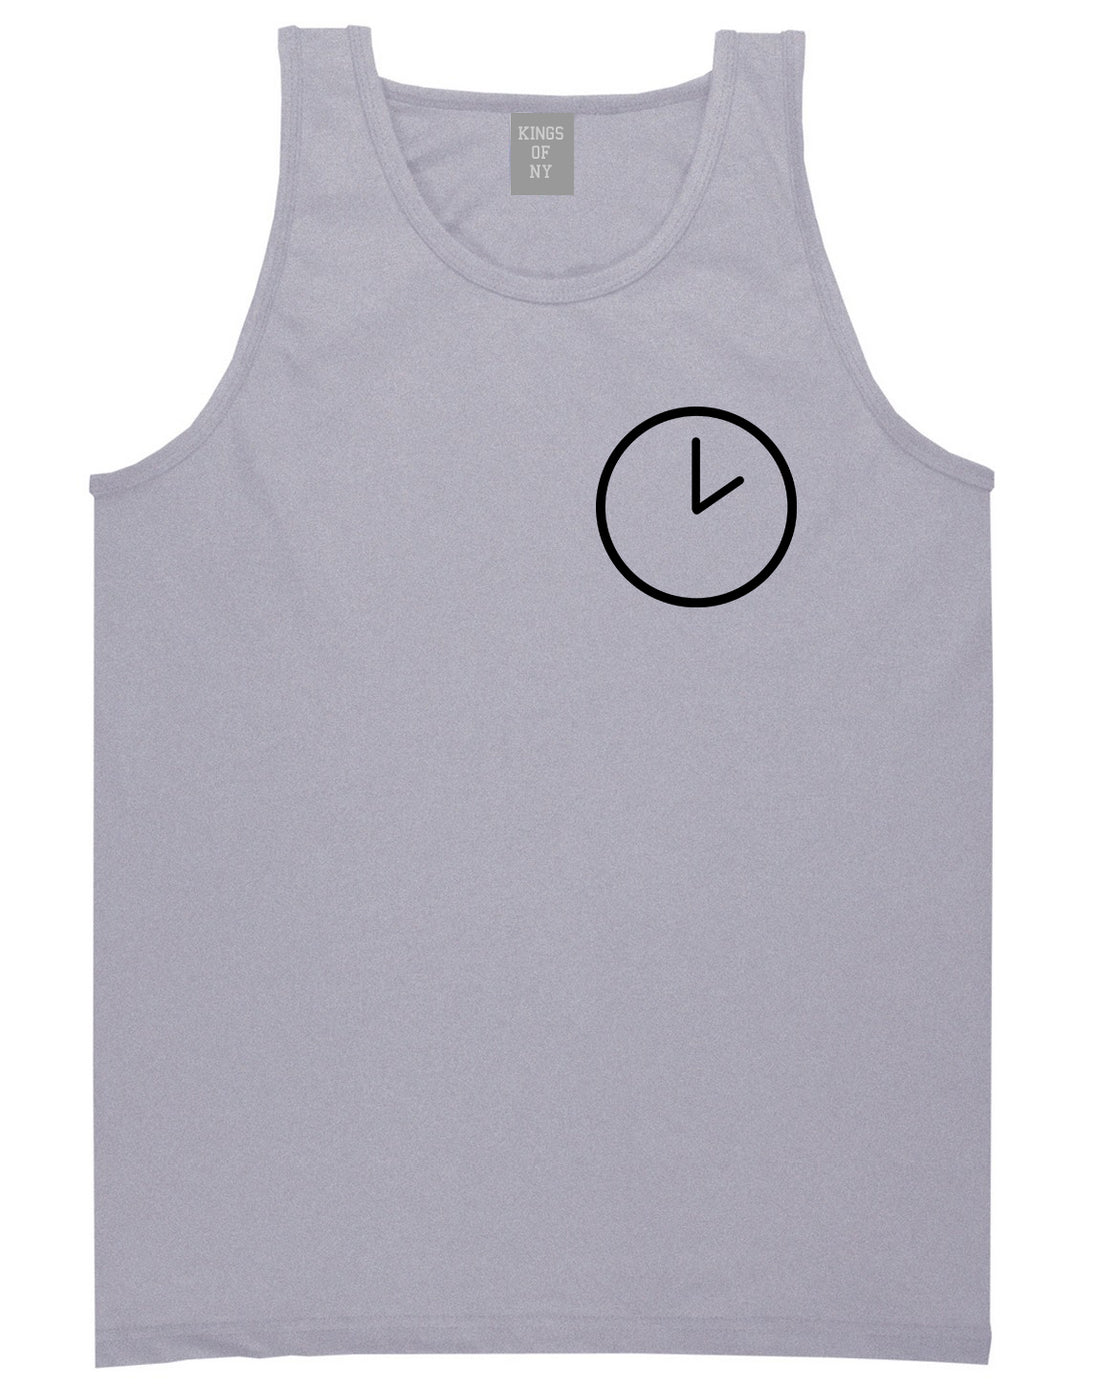 Clock Chest Grey Tank Top Shirt by Kings Of NY